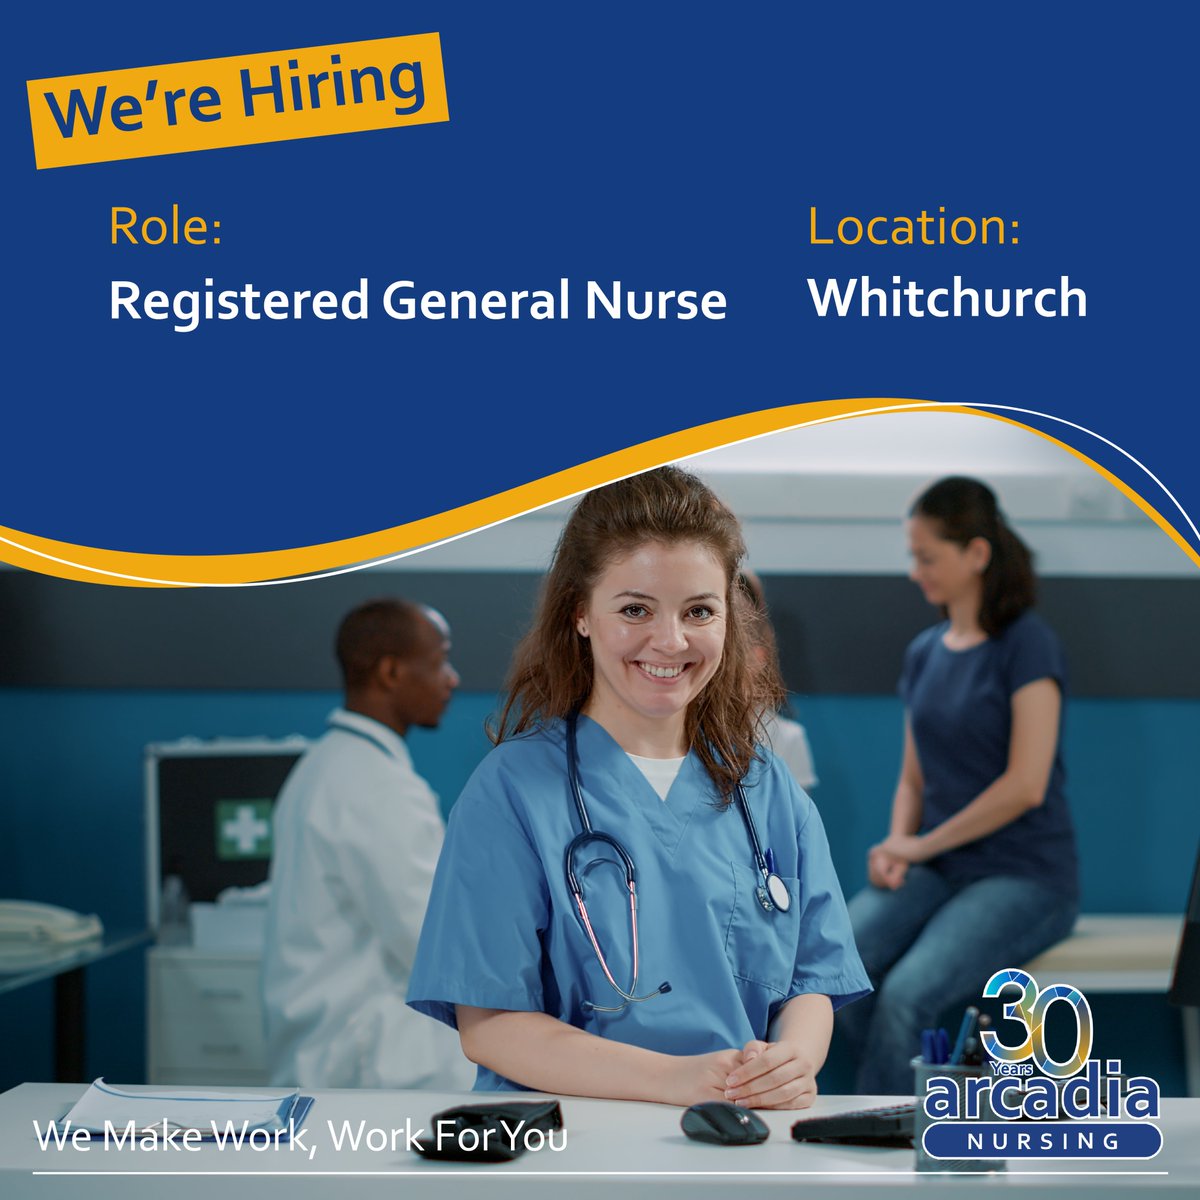 🏥👩‍⚕️We are recruiting Registered General Nurses to work in Whitchurch, if you or someone you know is interested in this role please contact our team on 01472 233 445 or apply online arcadianursing.co.uk 

#wearehiring #applynow #nursingroles #nursing